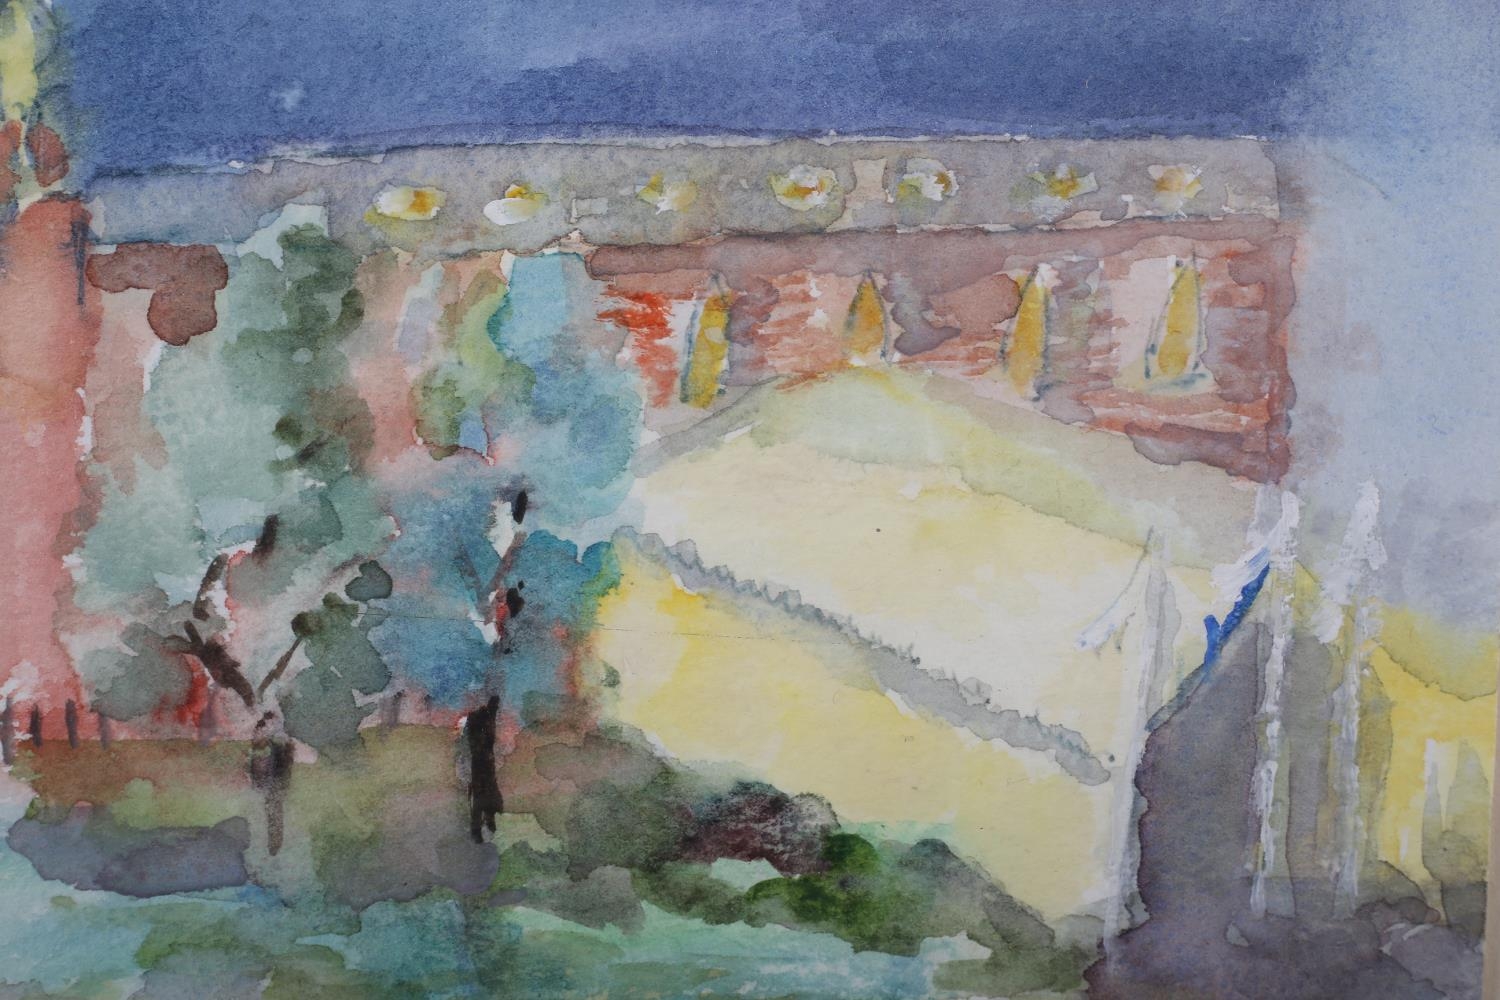 ARR Elizabeth Boyle, Contemporary, Park Square, Leeds with marquee, watercolour, dated 'October - Image 3 of 4